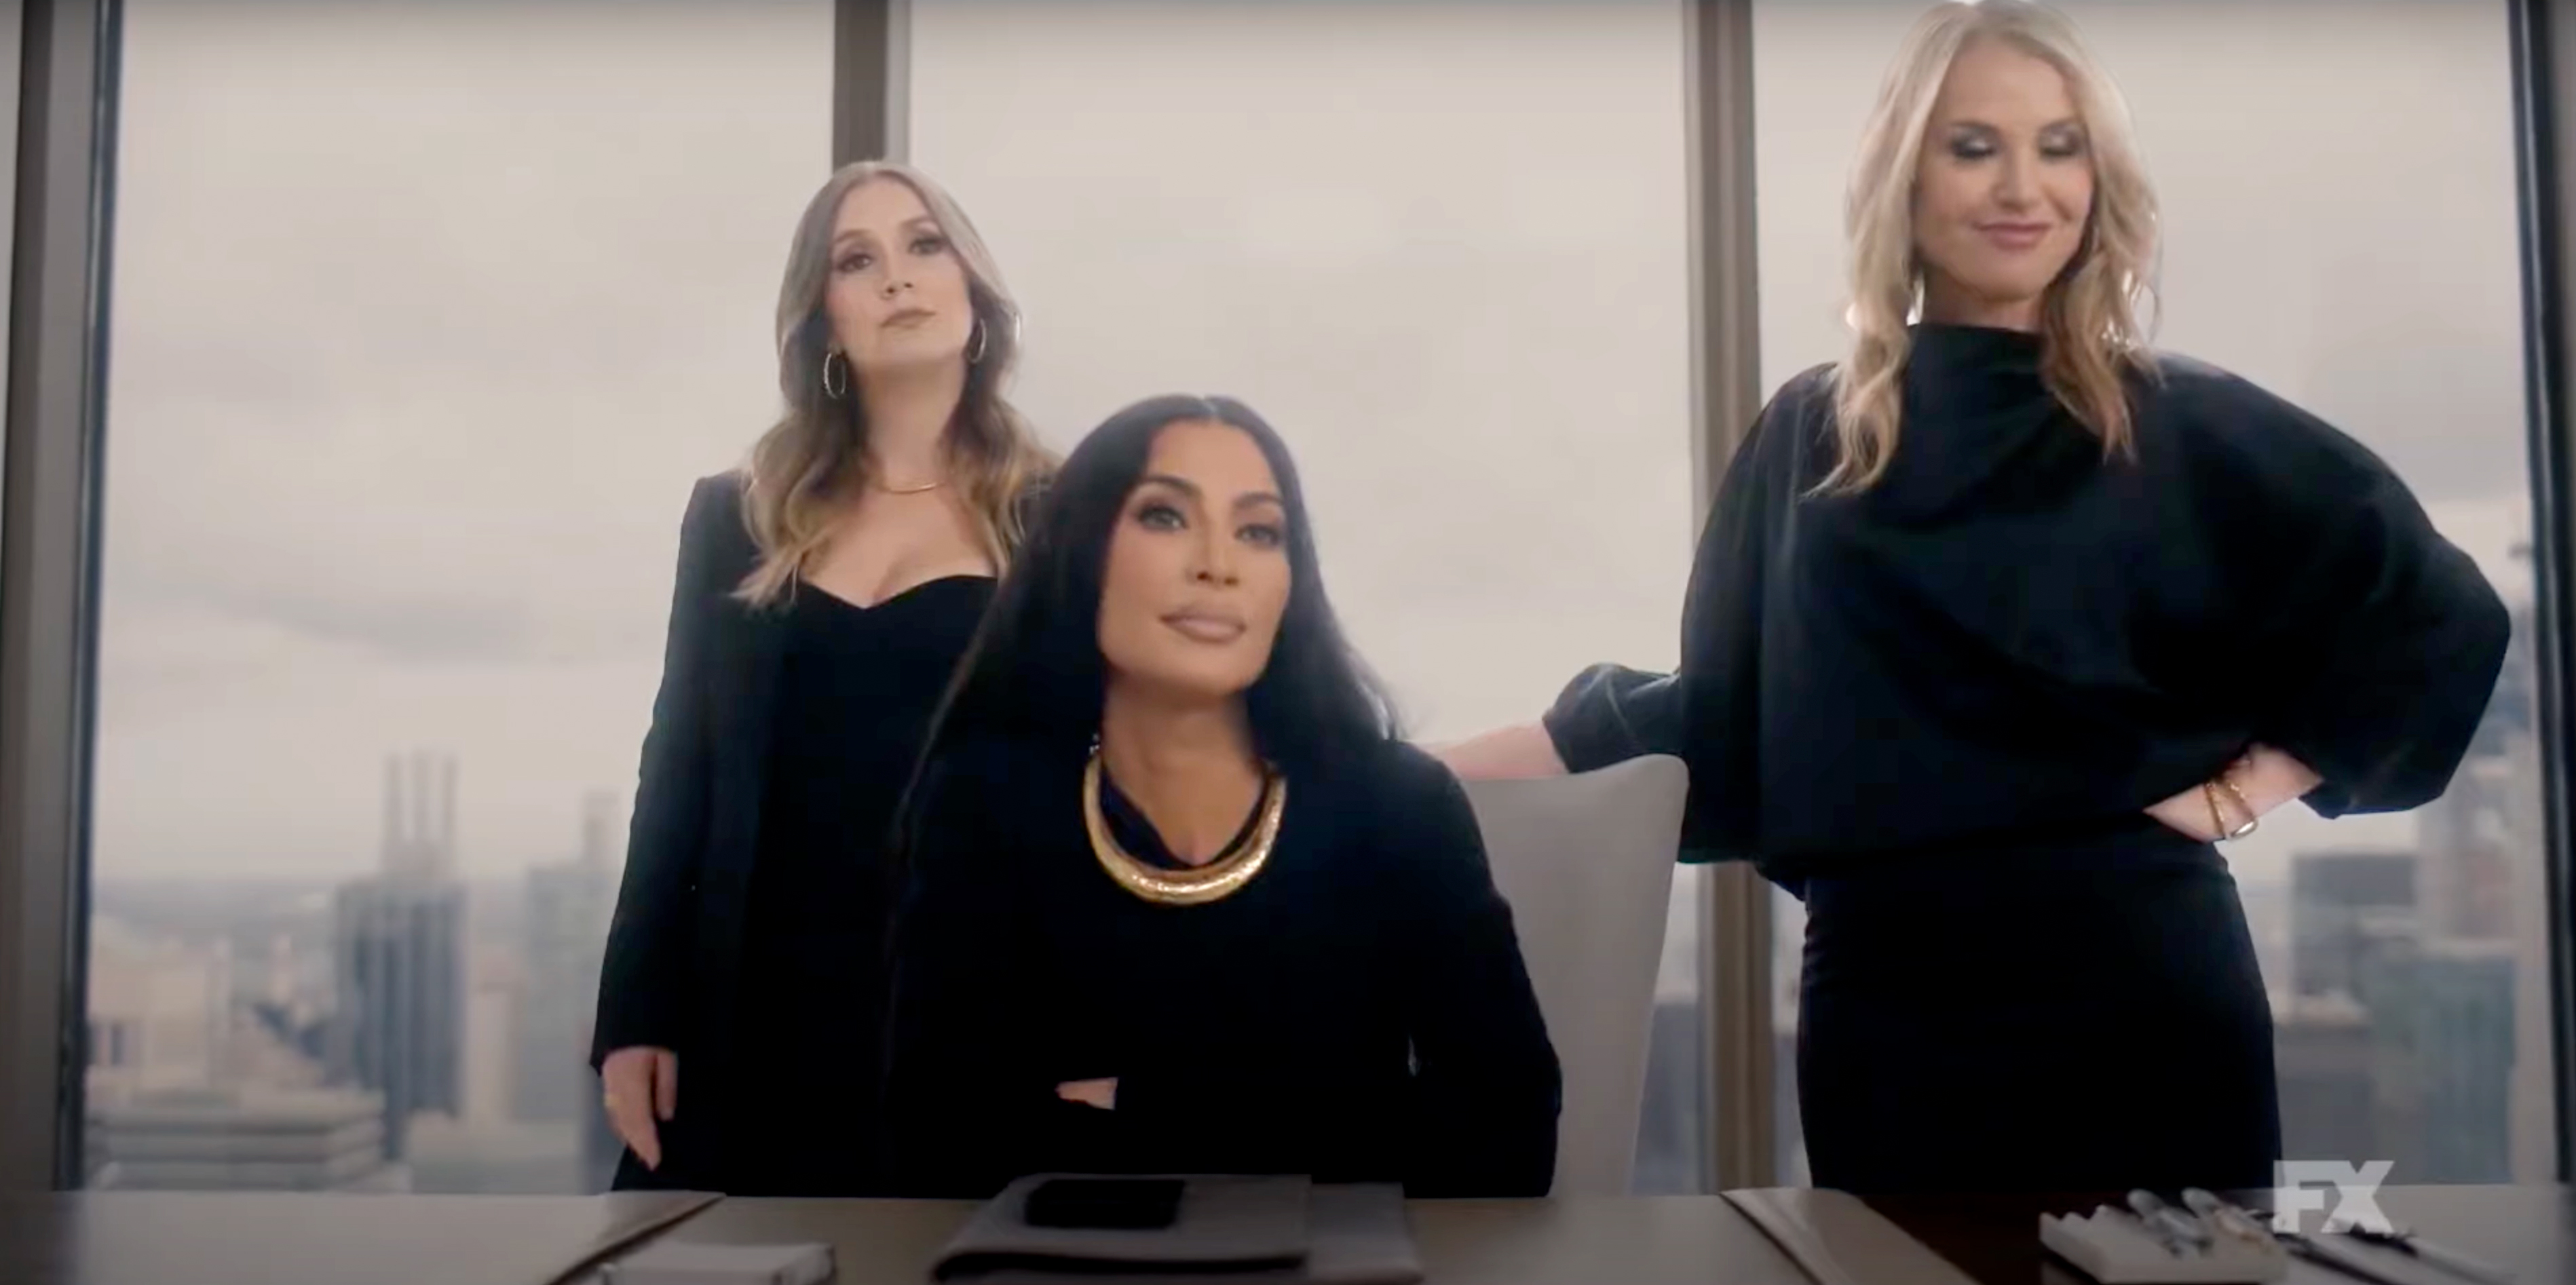 Kim Kardashian's Most Outrageous Lines on 'American Horror Story: Delicate': From Blowjobs to C—t Sucking